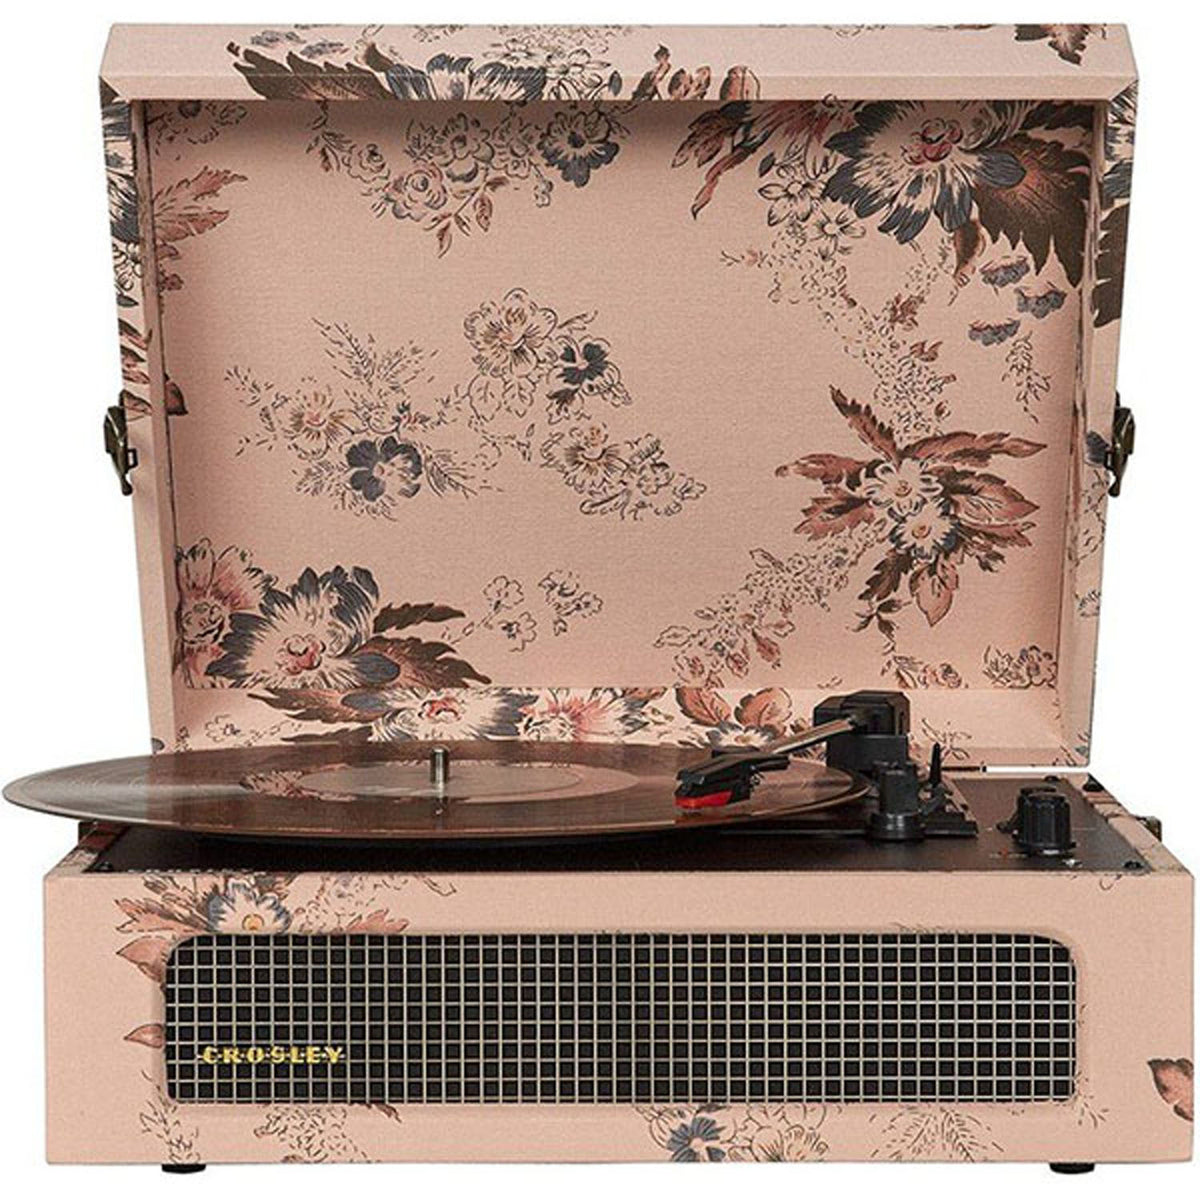 Voyager Portable Turntable with Built-in Bluetooth Receiver - Floral - CR8017B-FL4